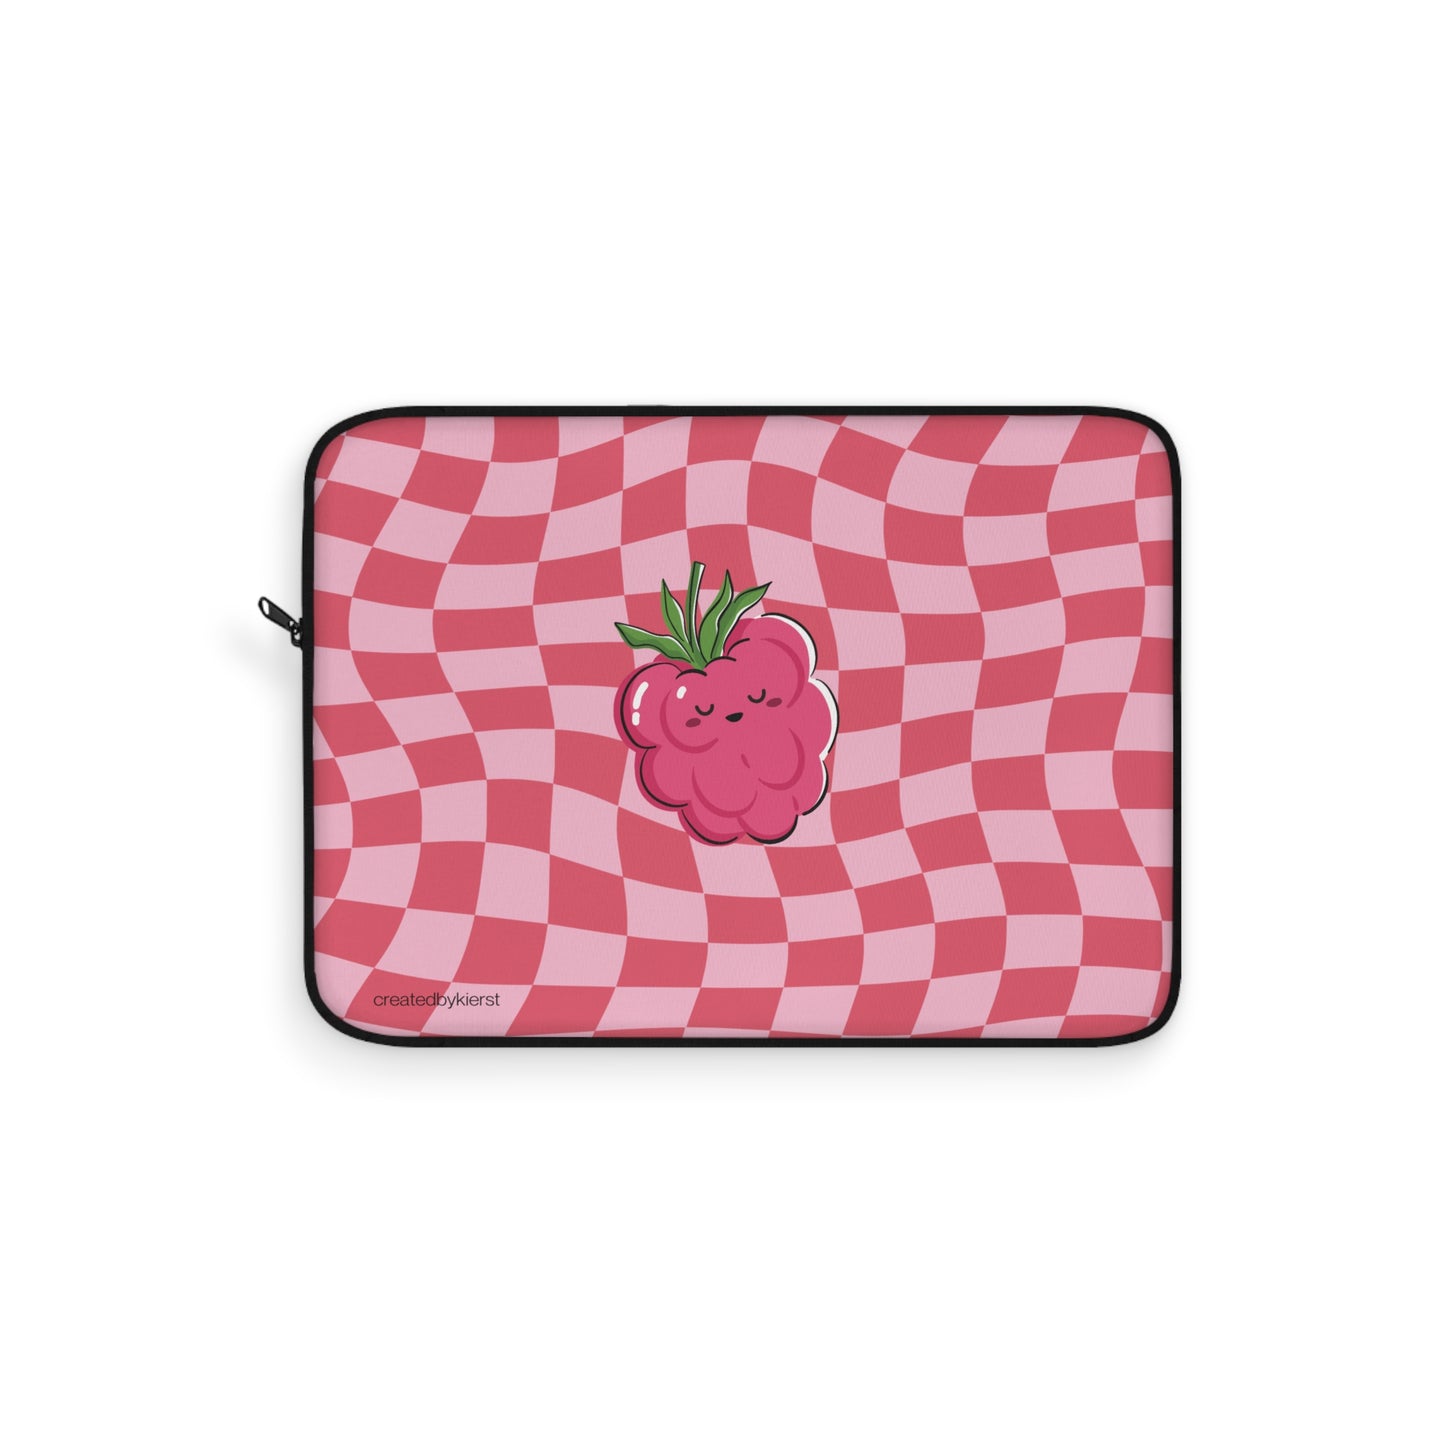 Animated Raspberry on Red and Pink Checkered Laptop Sleeve